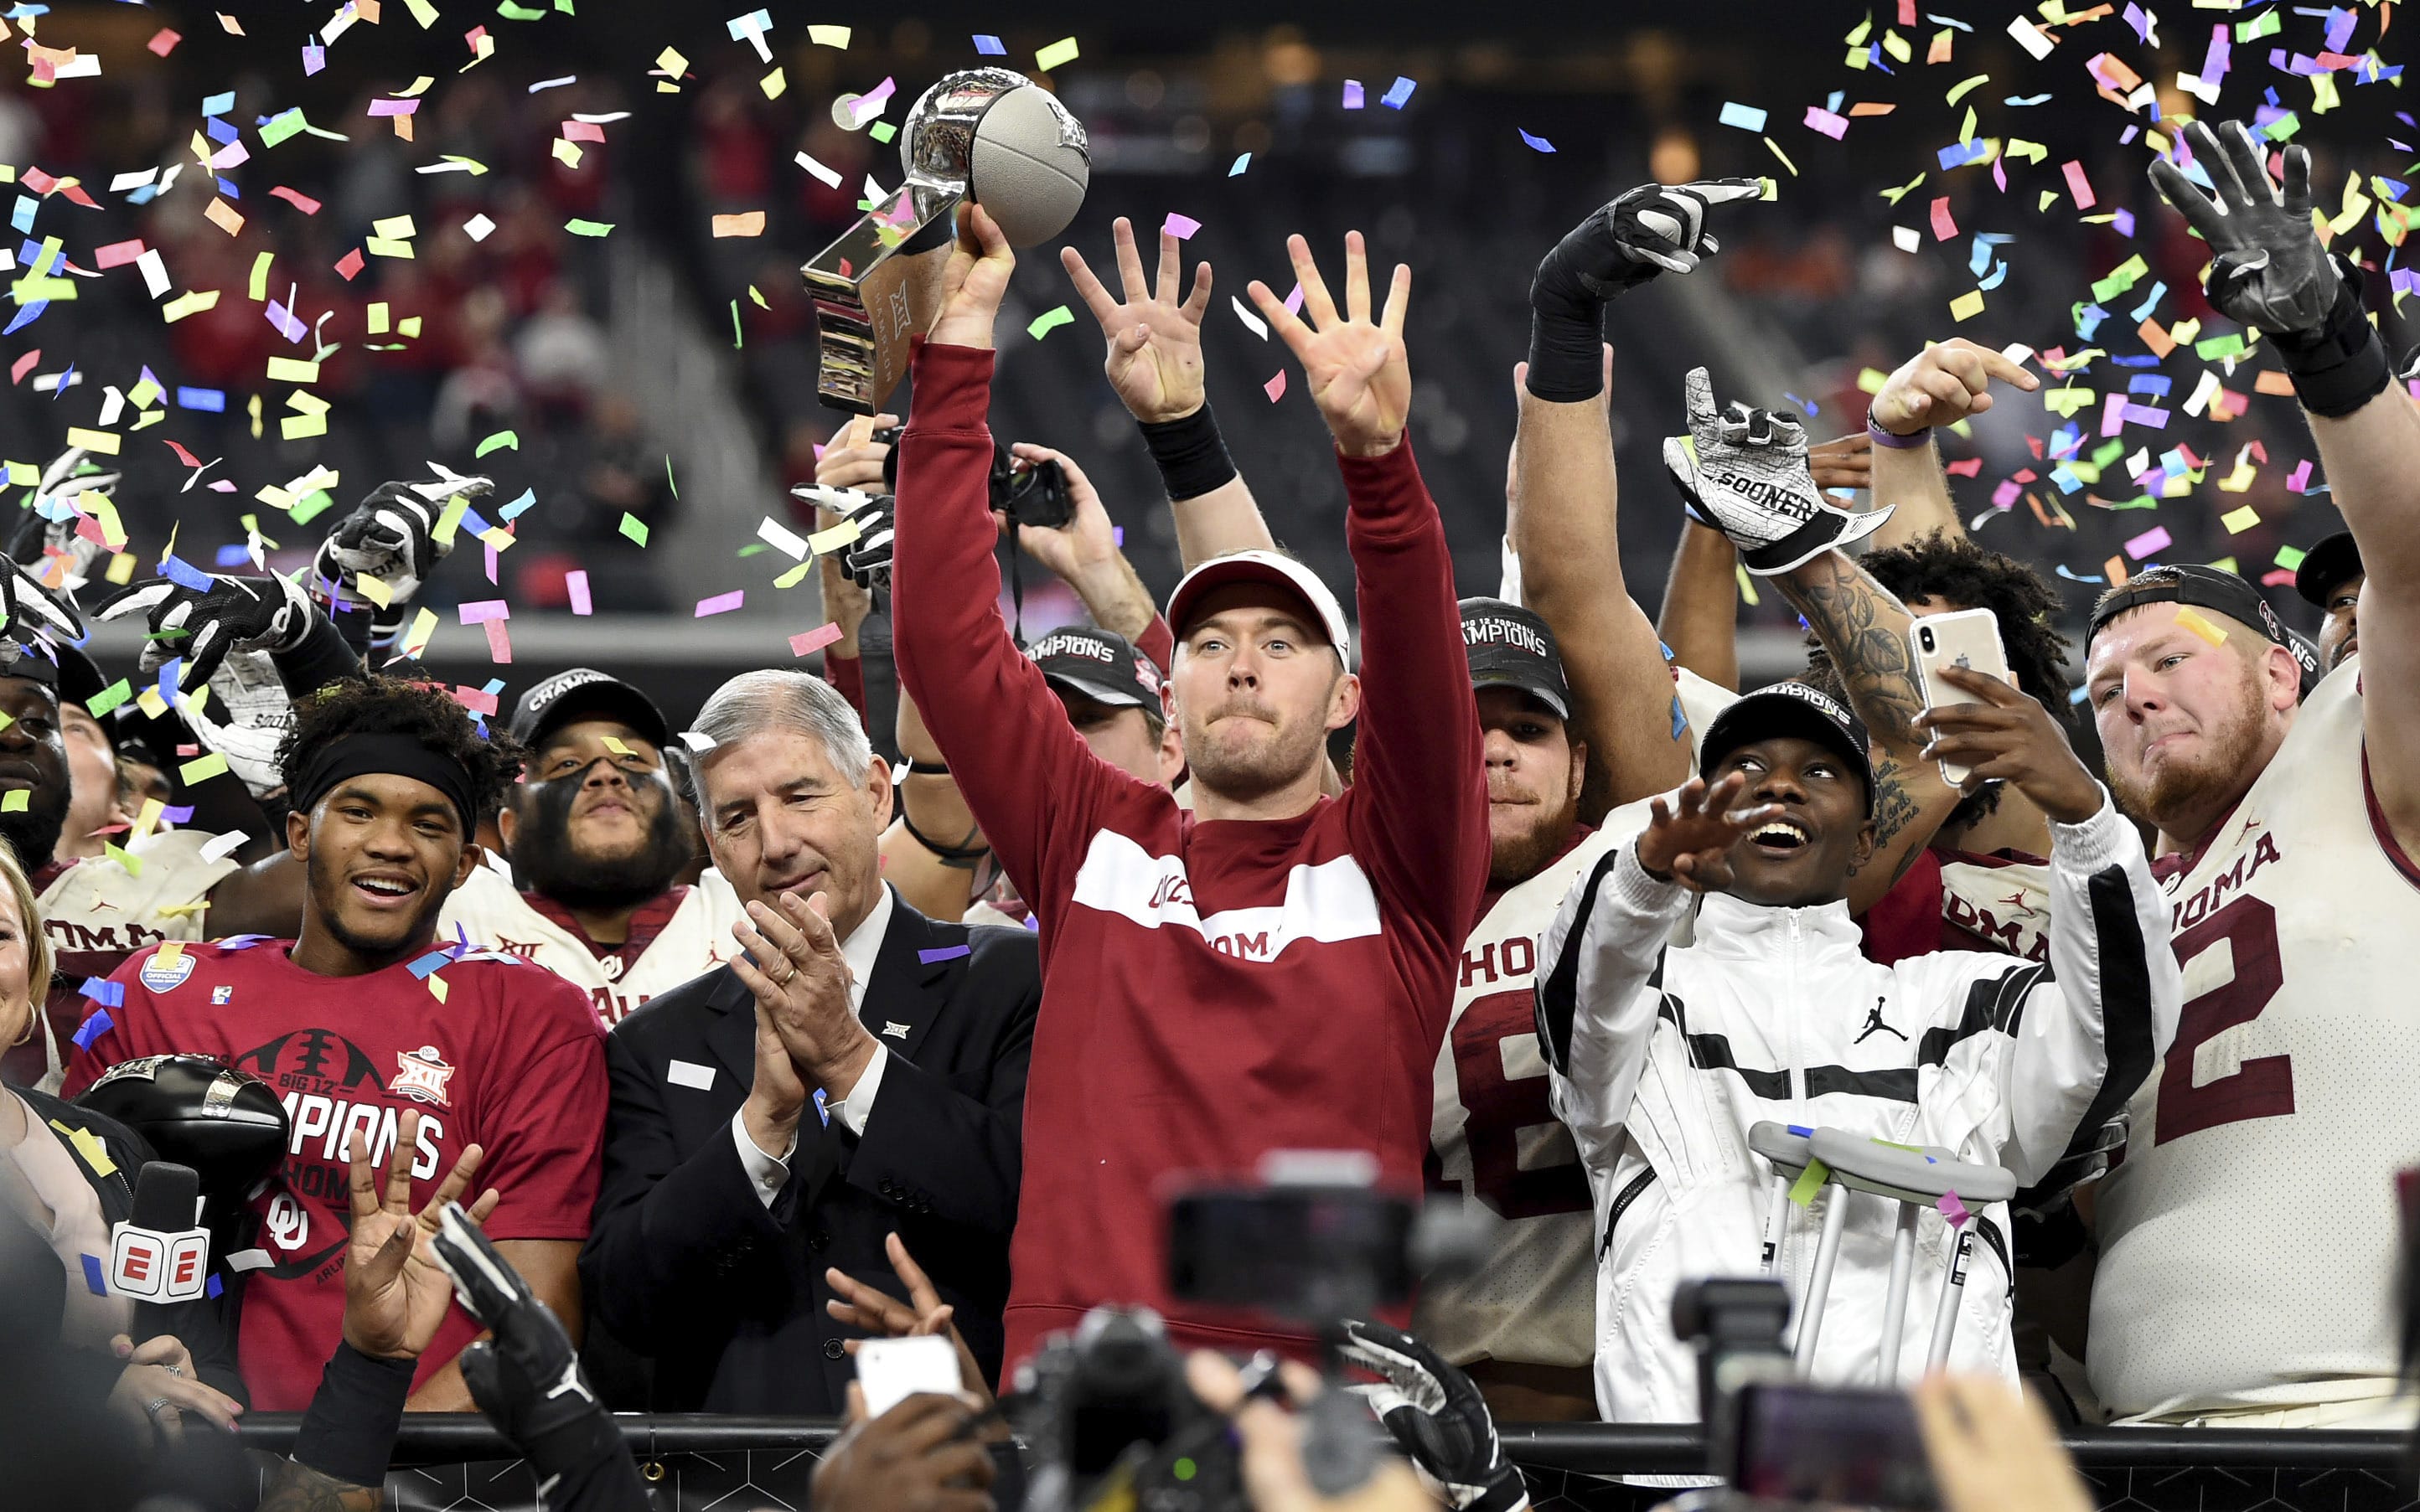 Oklahoma head coach Lincoln Riley hoists the Big 12 Conference championship trophy after beating Texas 39-27 in the Big 12 Conference championship NCAA college football game on Saturday, Dec. 1, 2018, in Arlington, Texas.